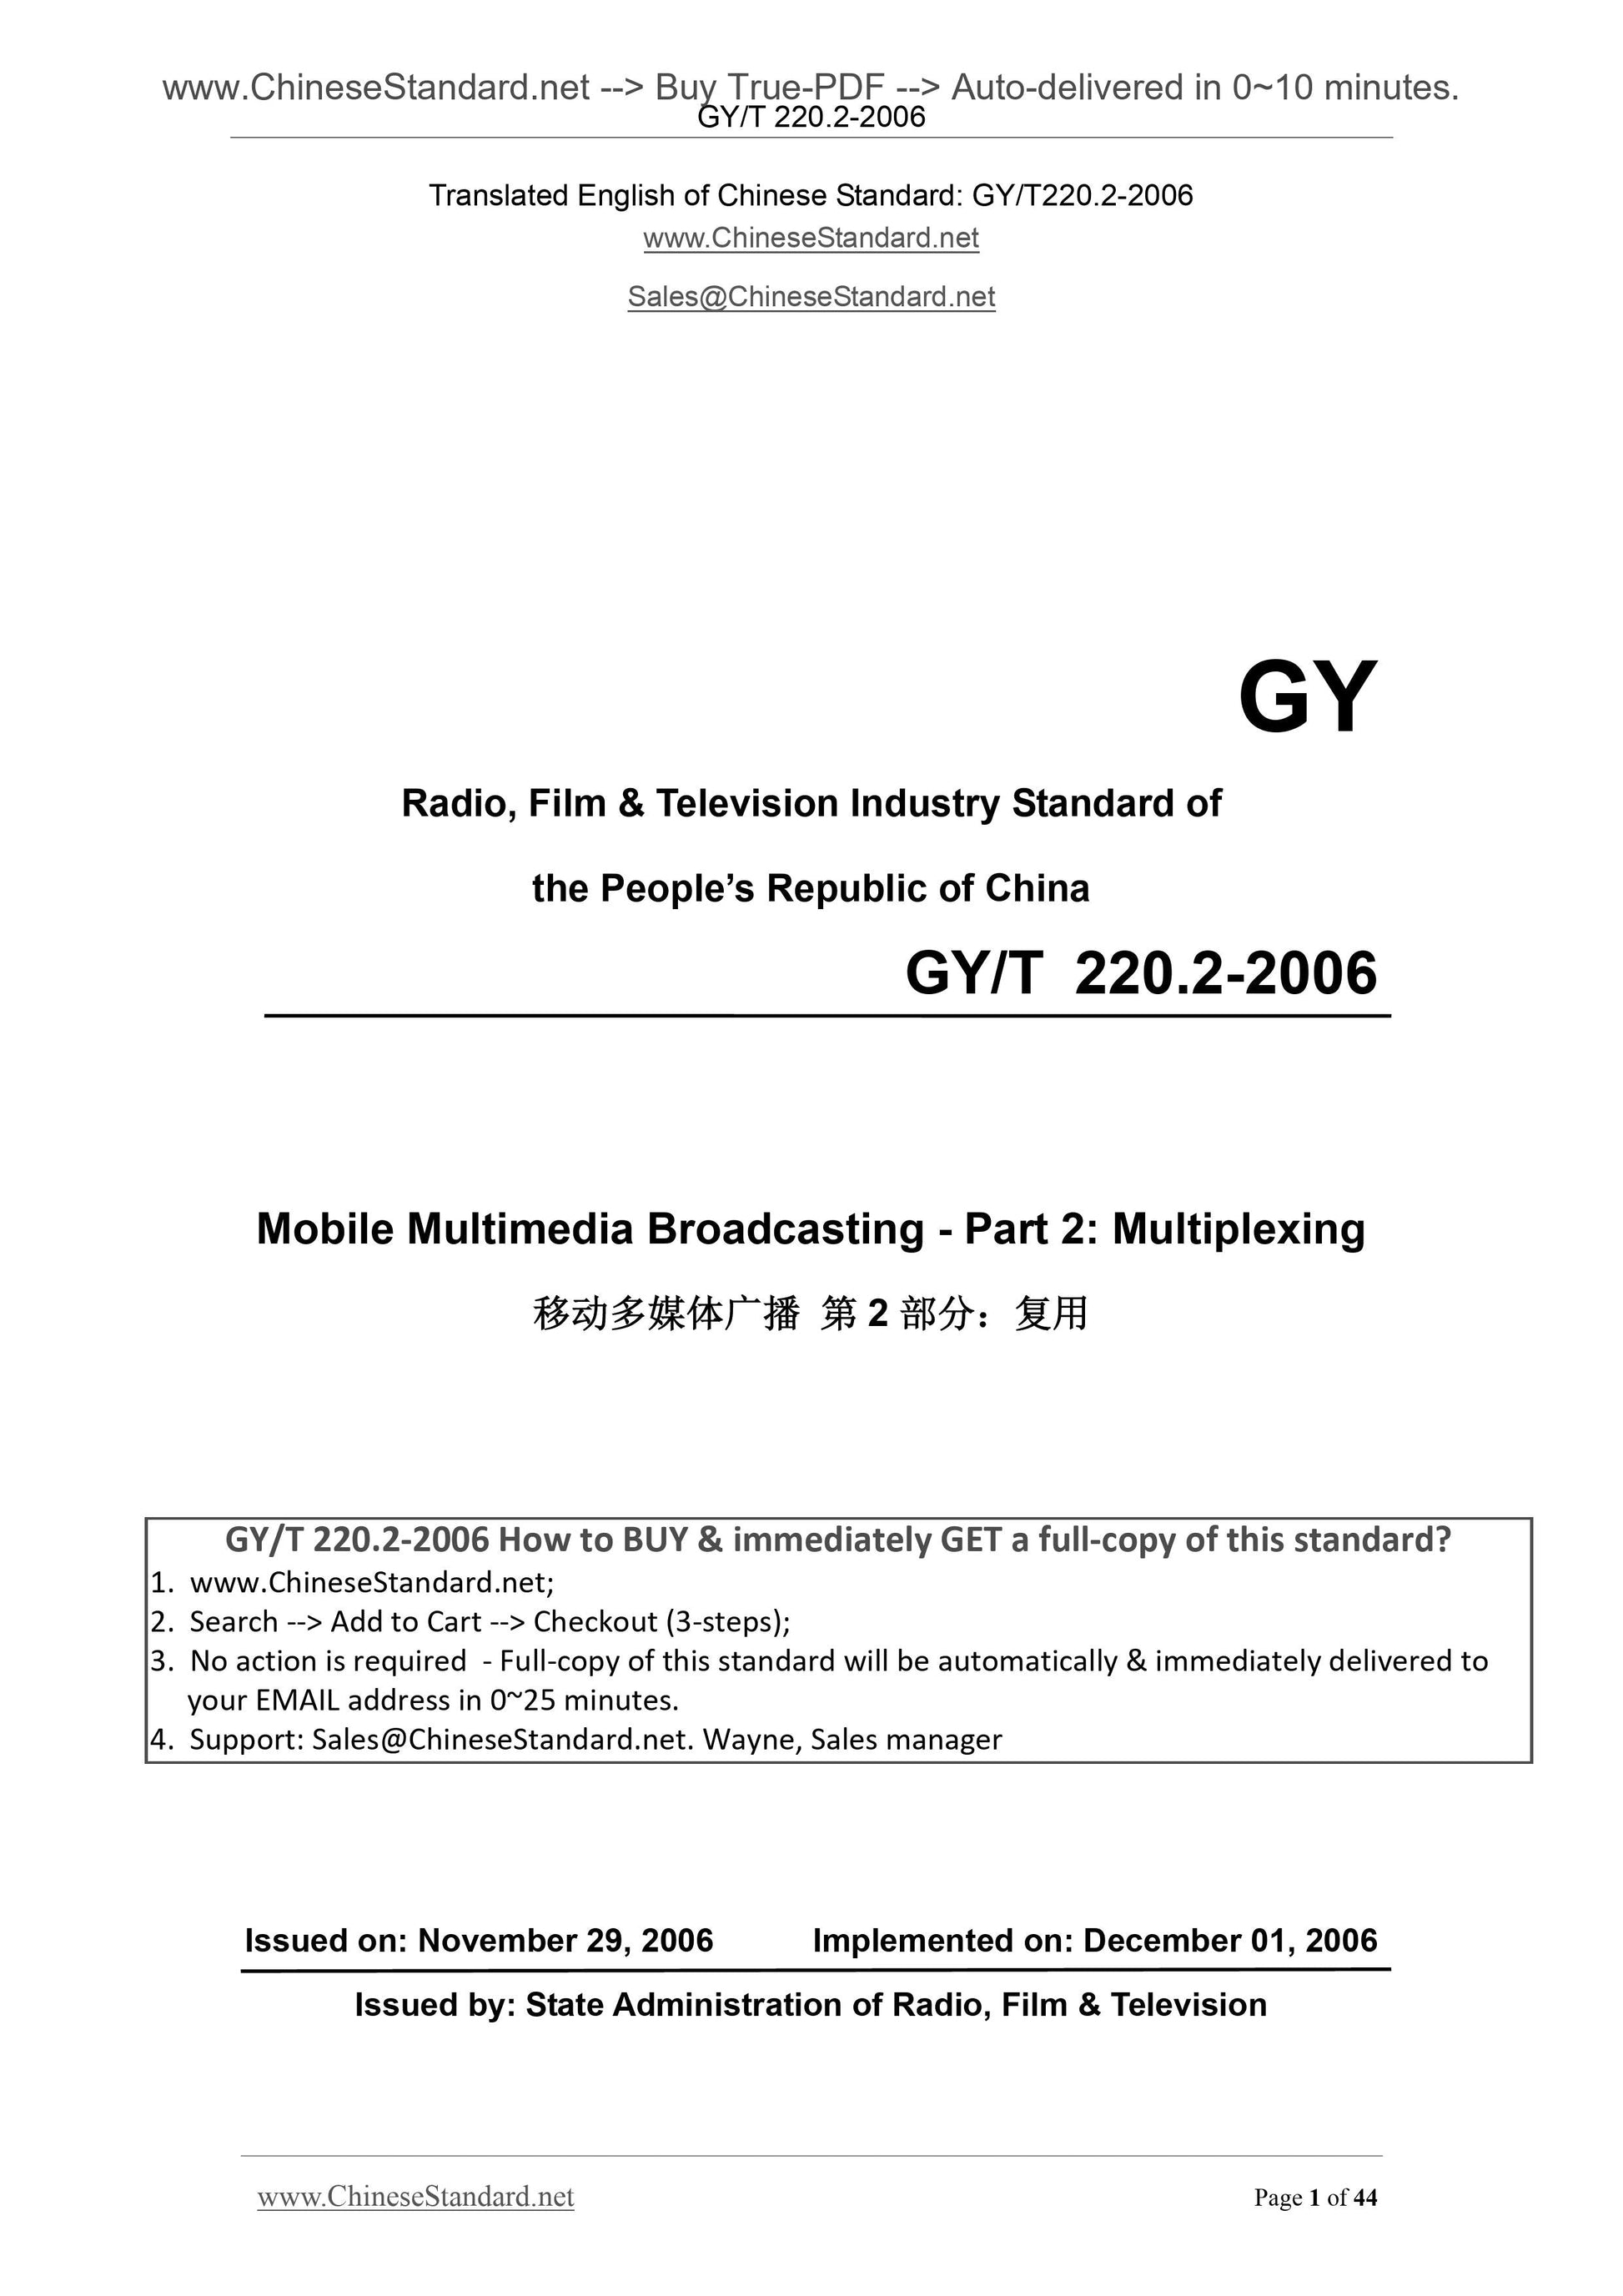 GY/T 220.2-2006 Page 1